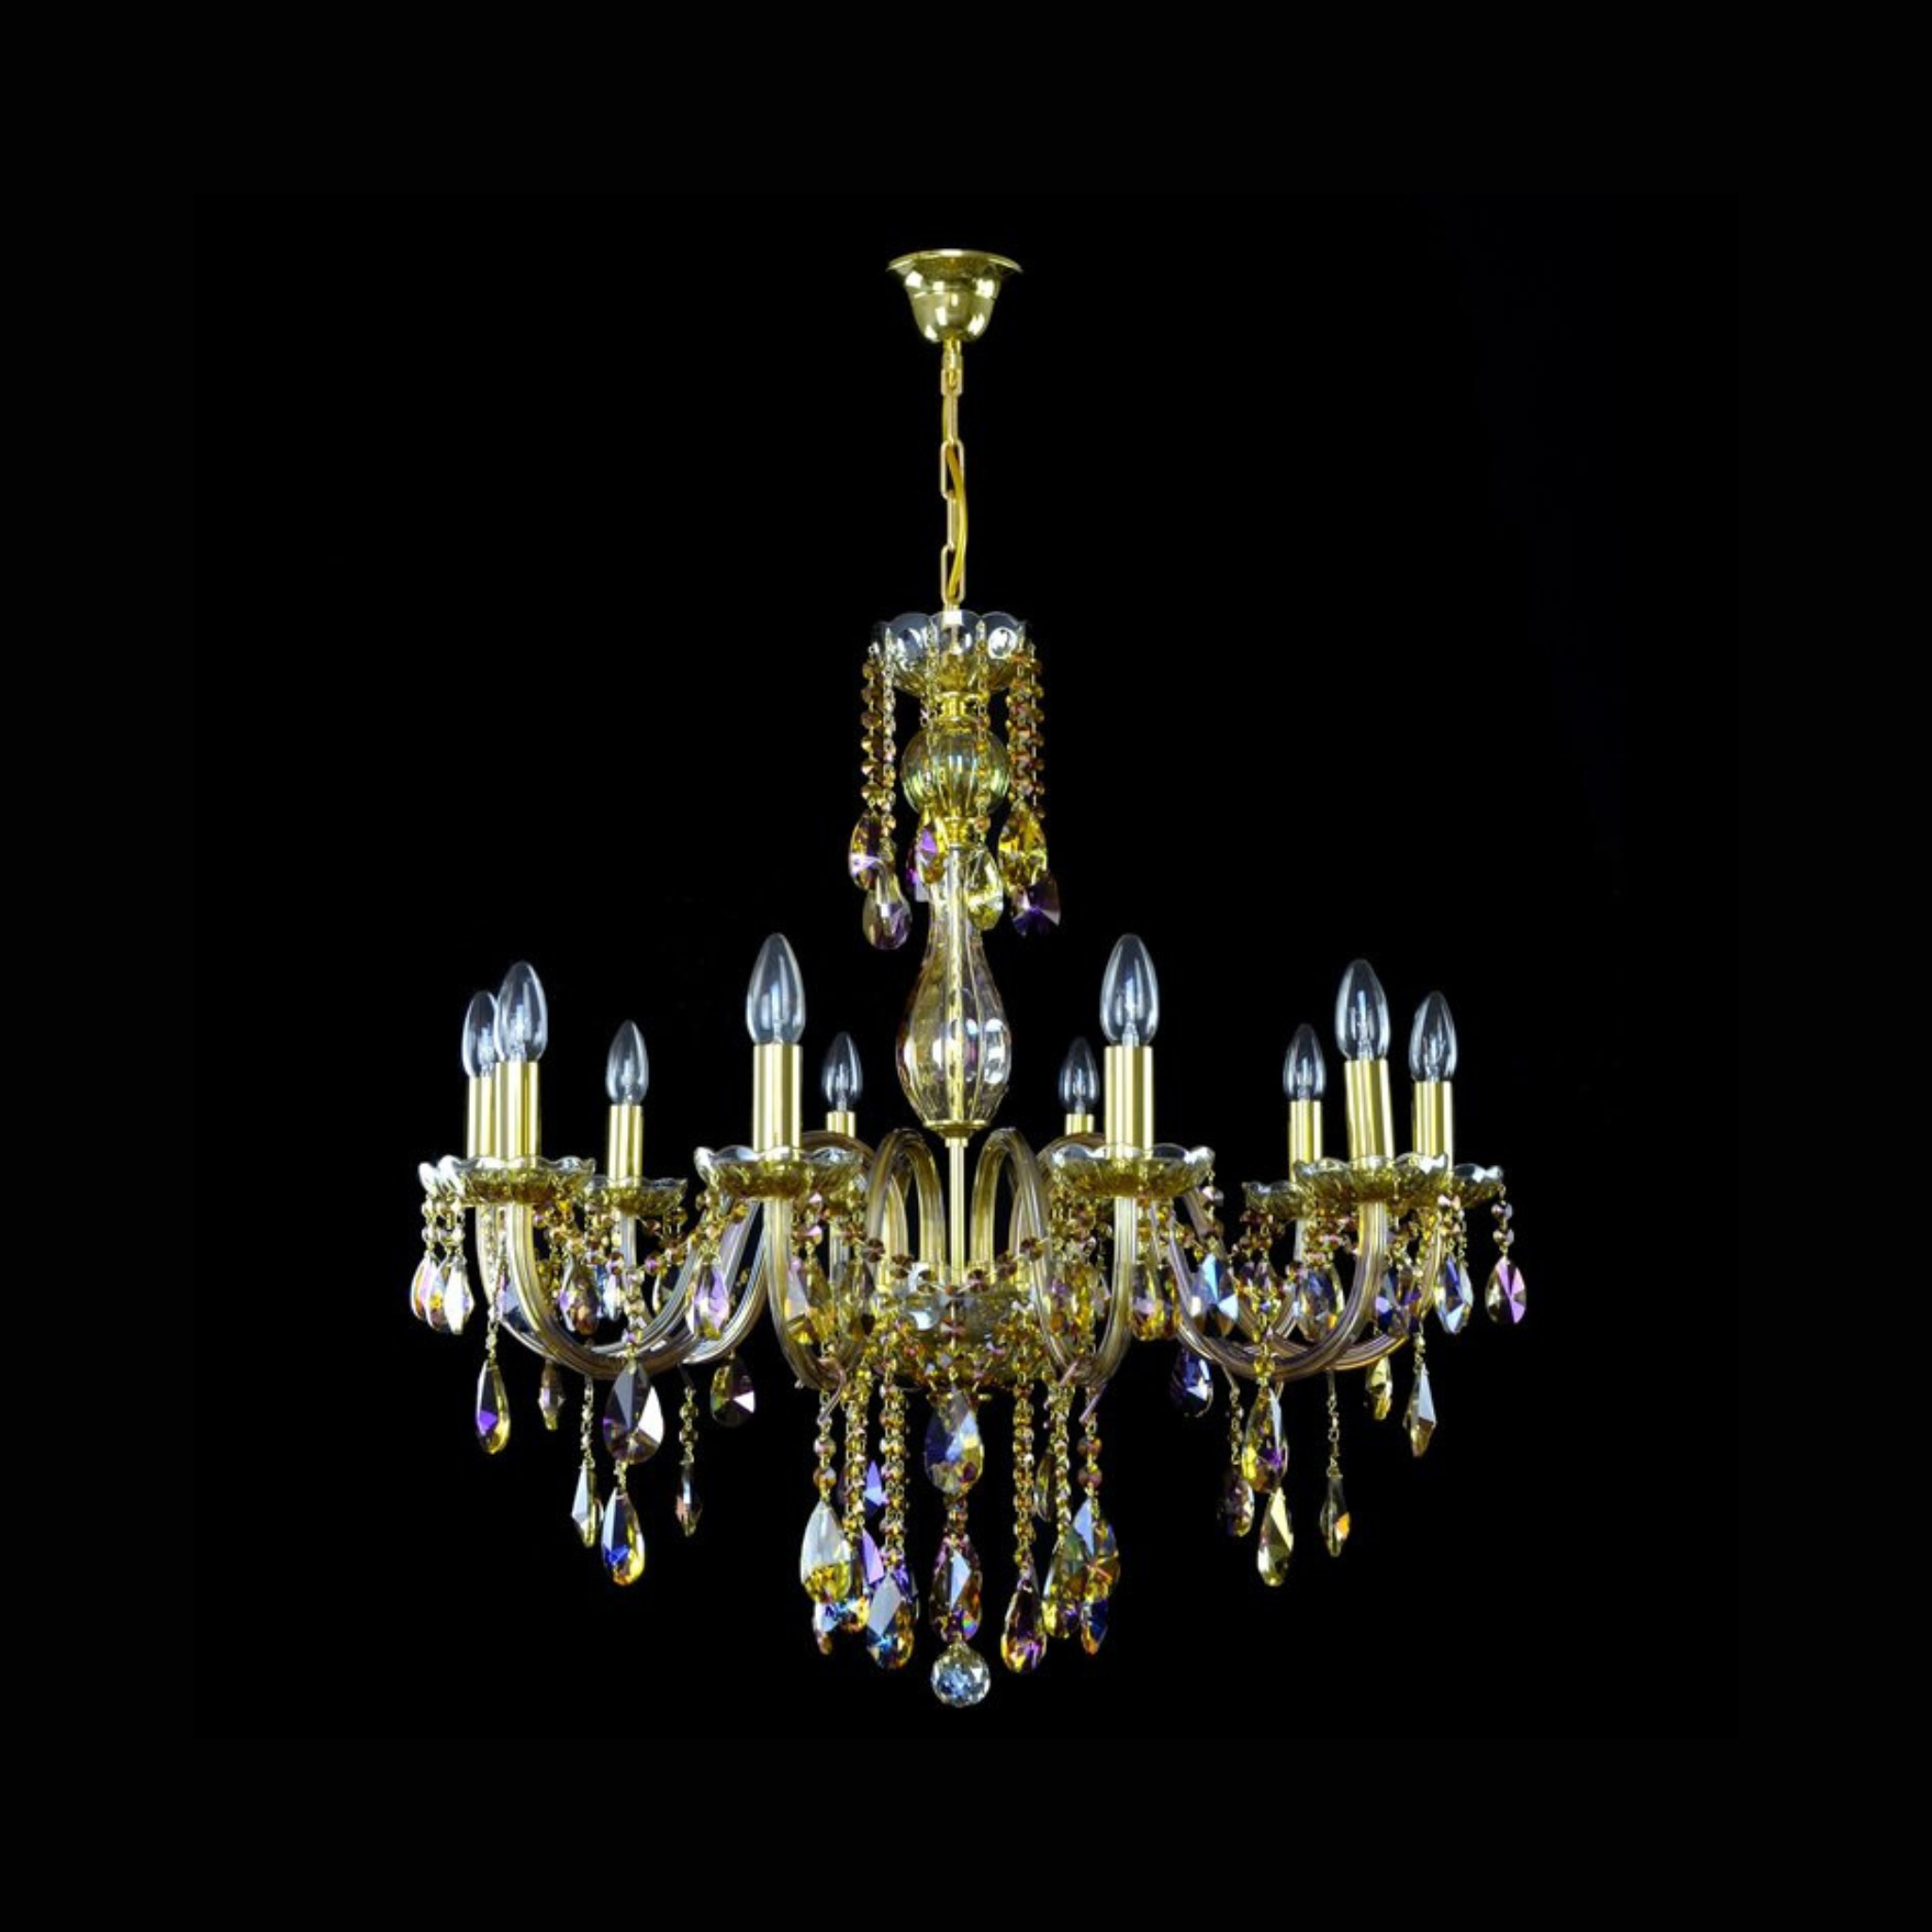 Clarit 10 Crystal Glass Chandelier - Wranovsky - Luxury Lighting Boutique